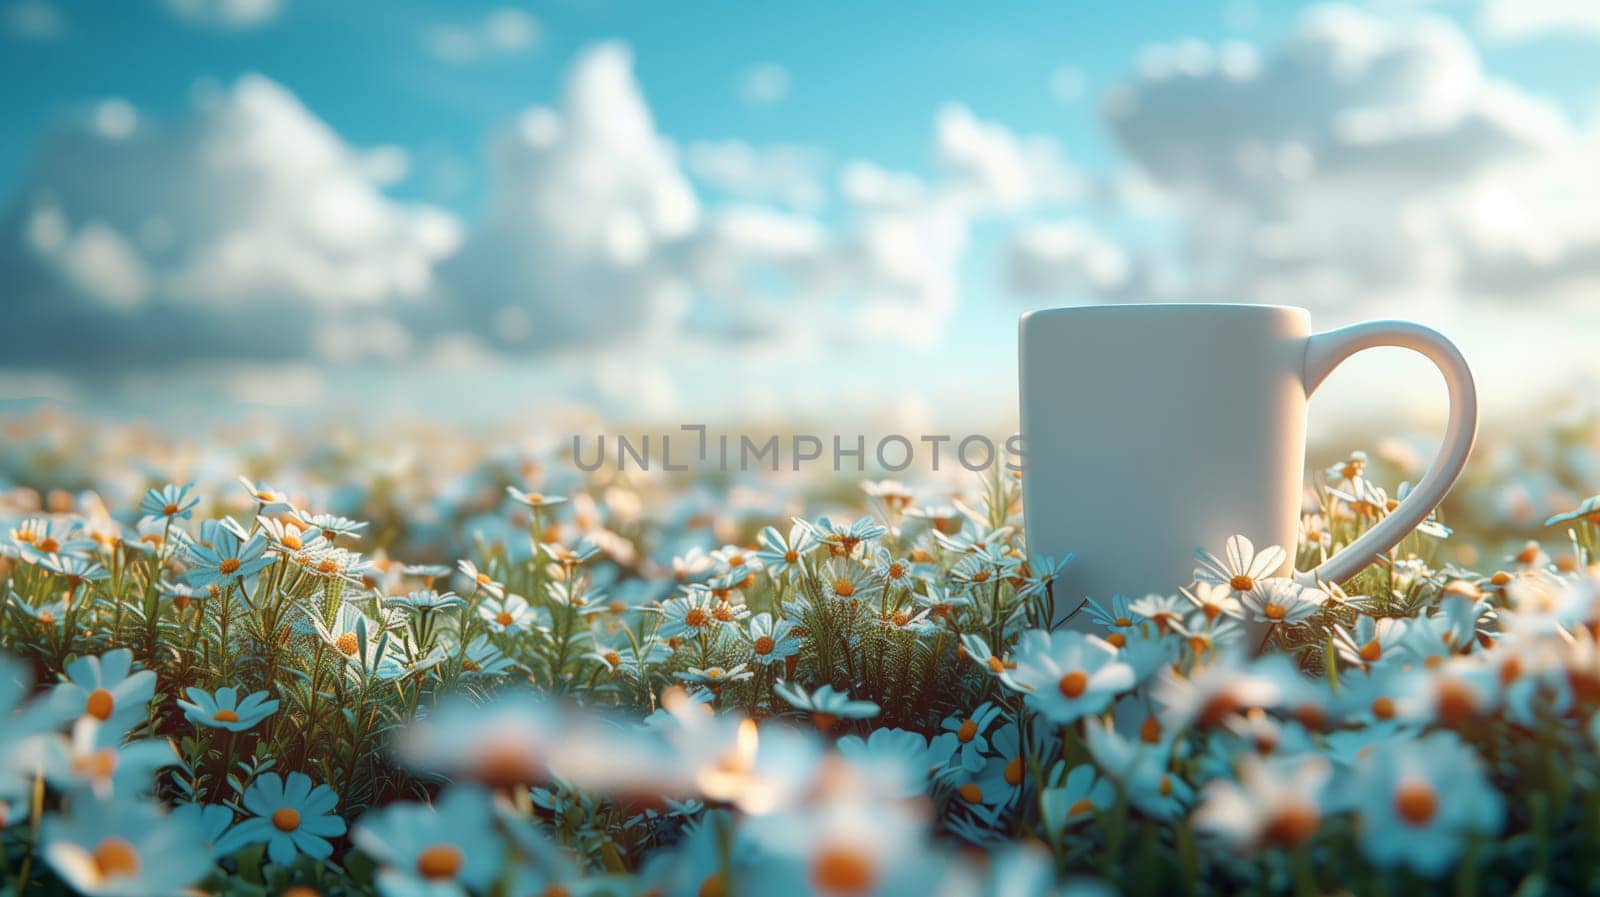 A cup of coffee sits on a cloud in a field of daisies, surrounded by a natural landscape with skyscrapers in the distance